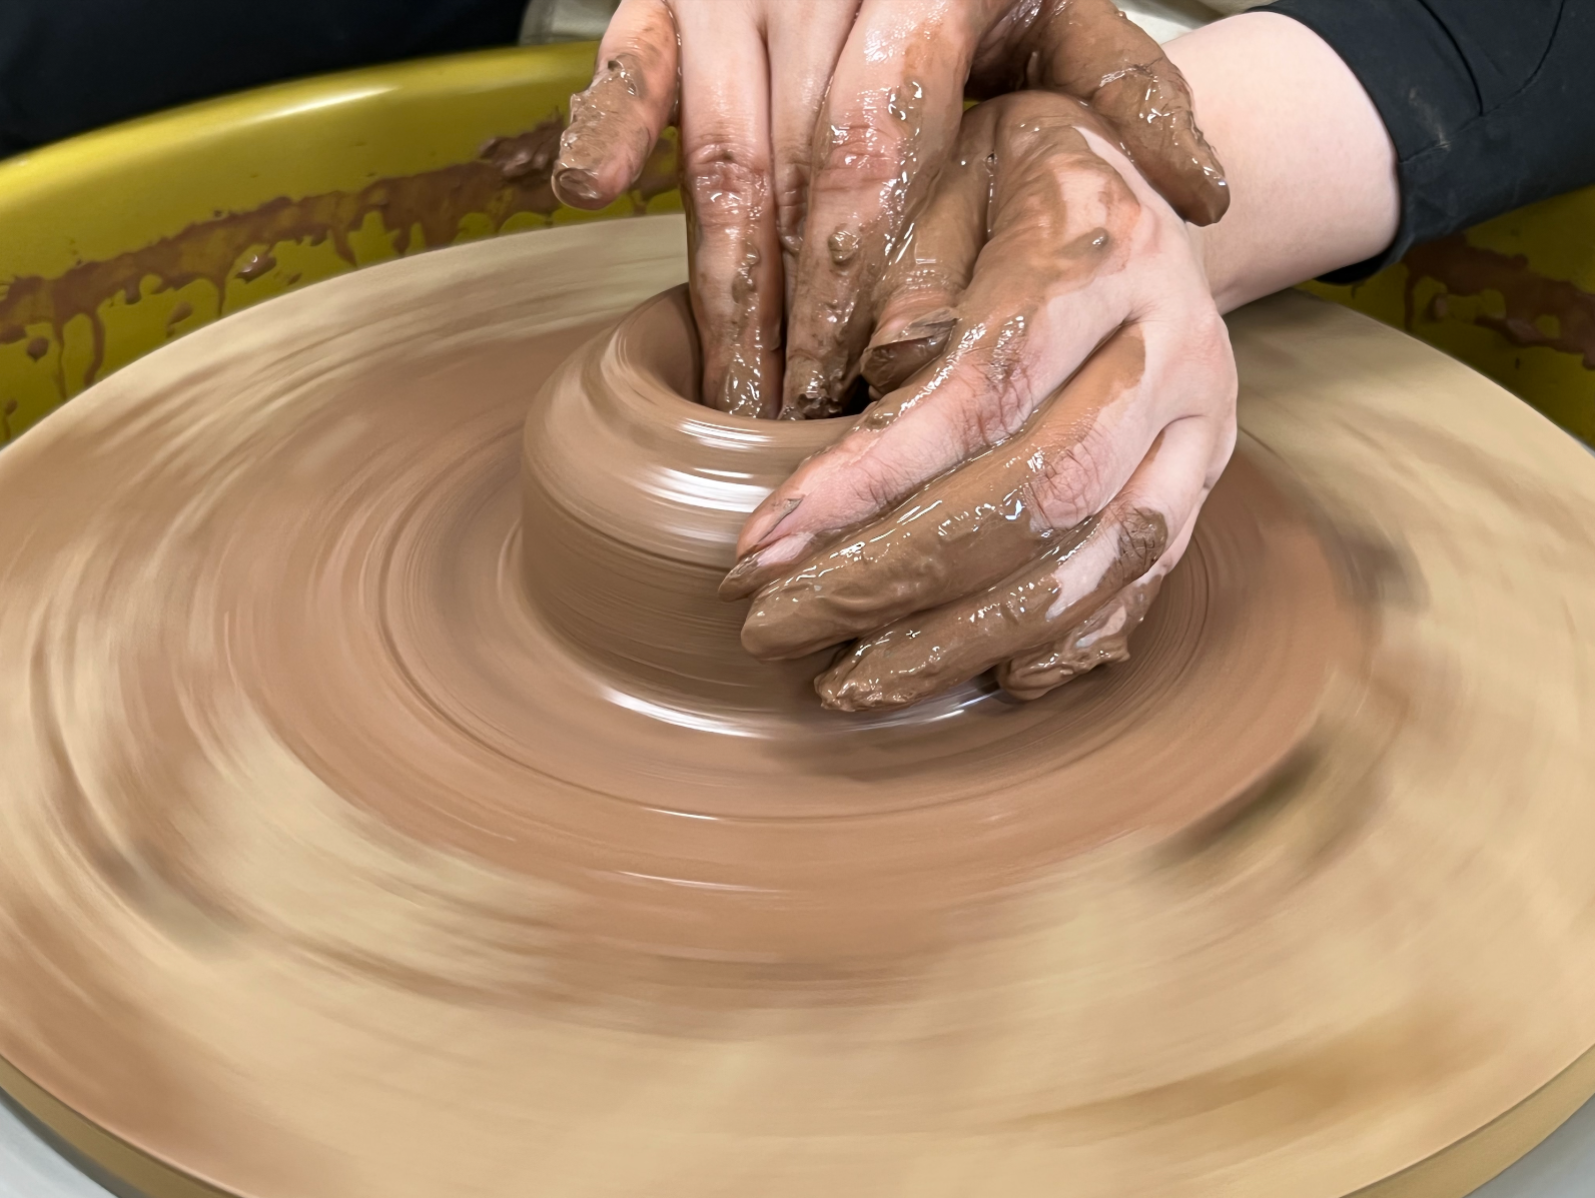 Production of pieces on the pottery wheel